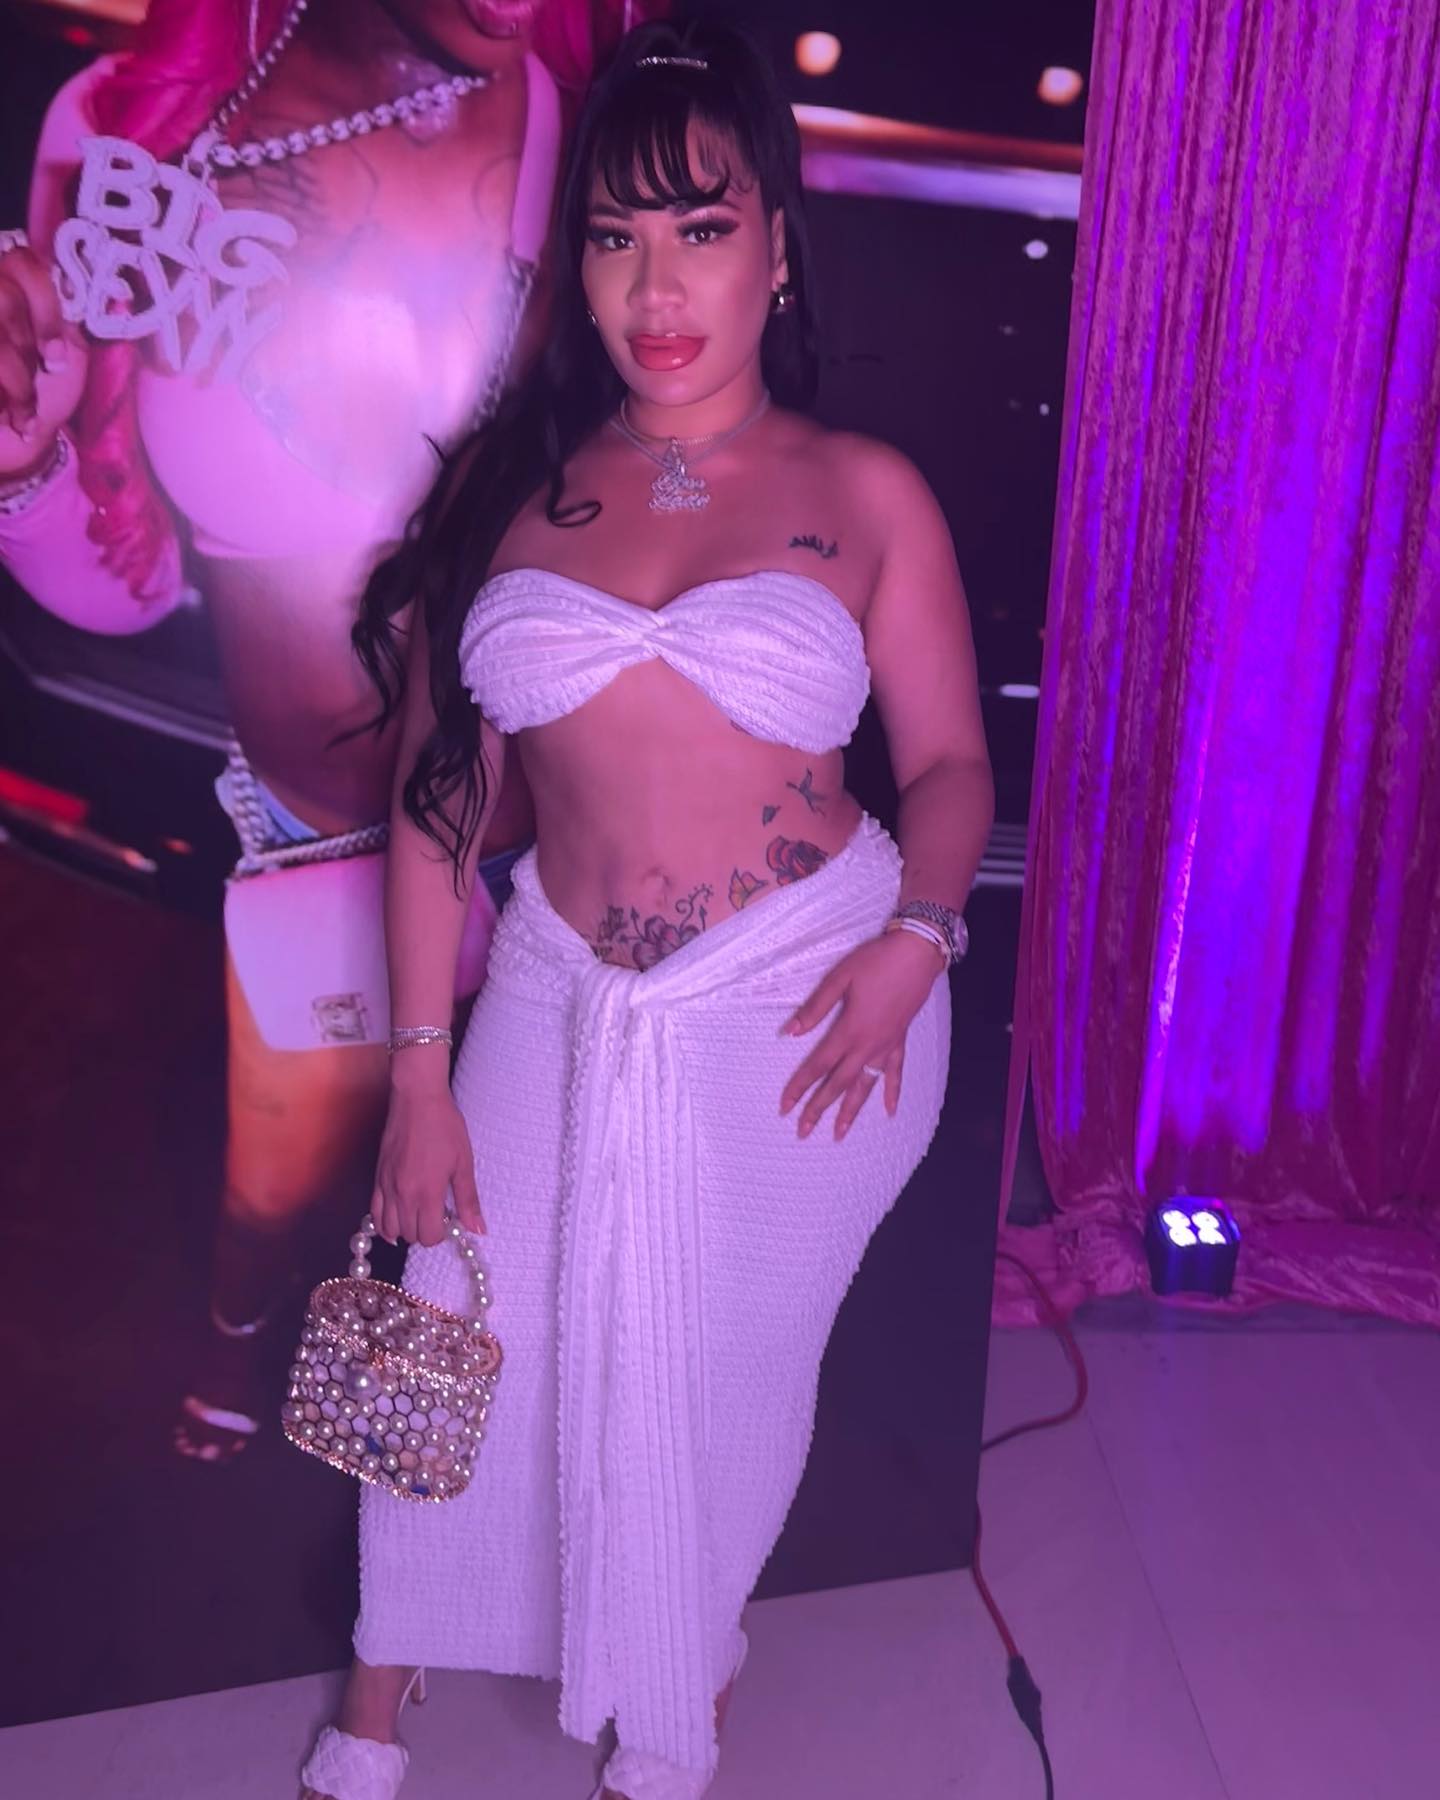 Get It Sexyy 💖 
@sexyyred All White Party 
•
•
•
#sexyyred #sexxyredbirthdayparty #allwhiteparty #explore #fypage #miaminightlife